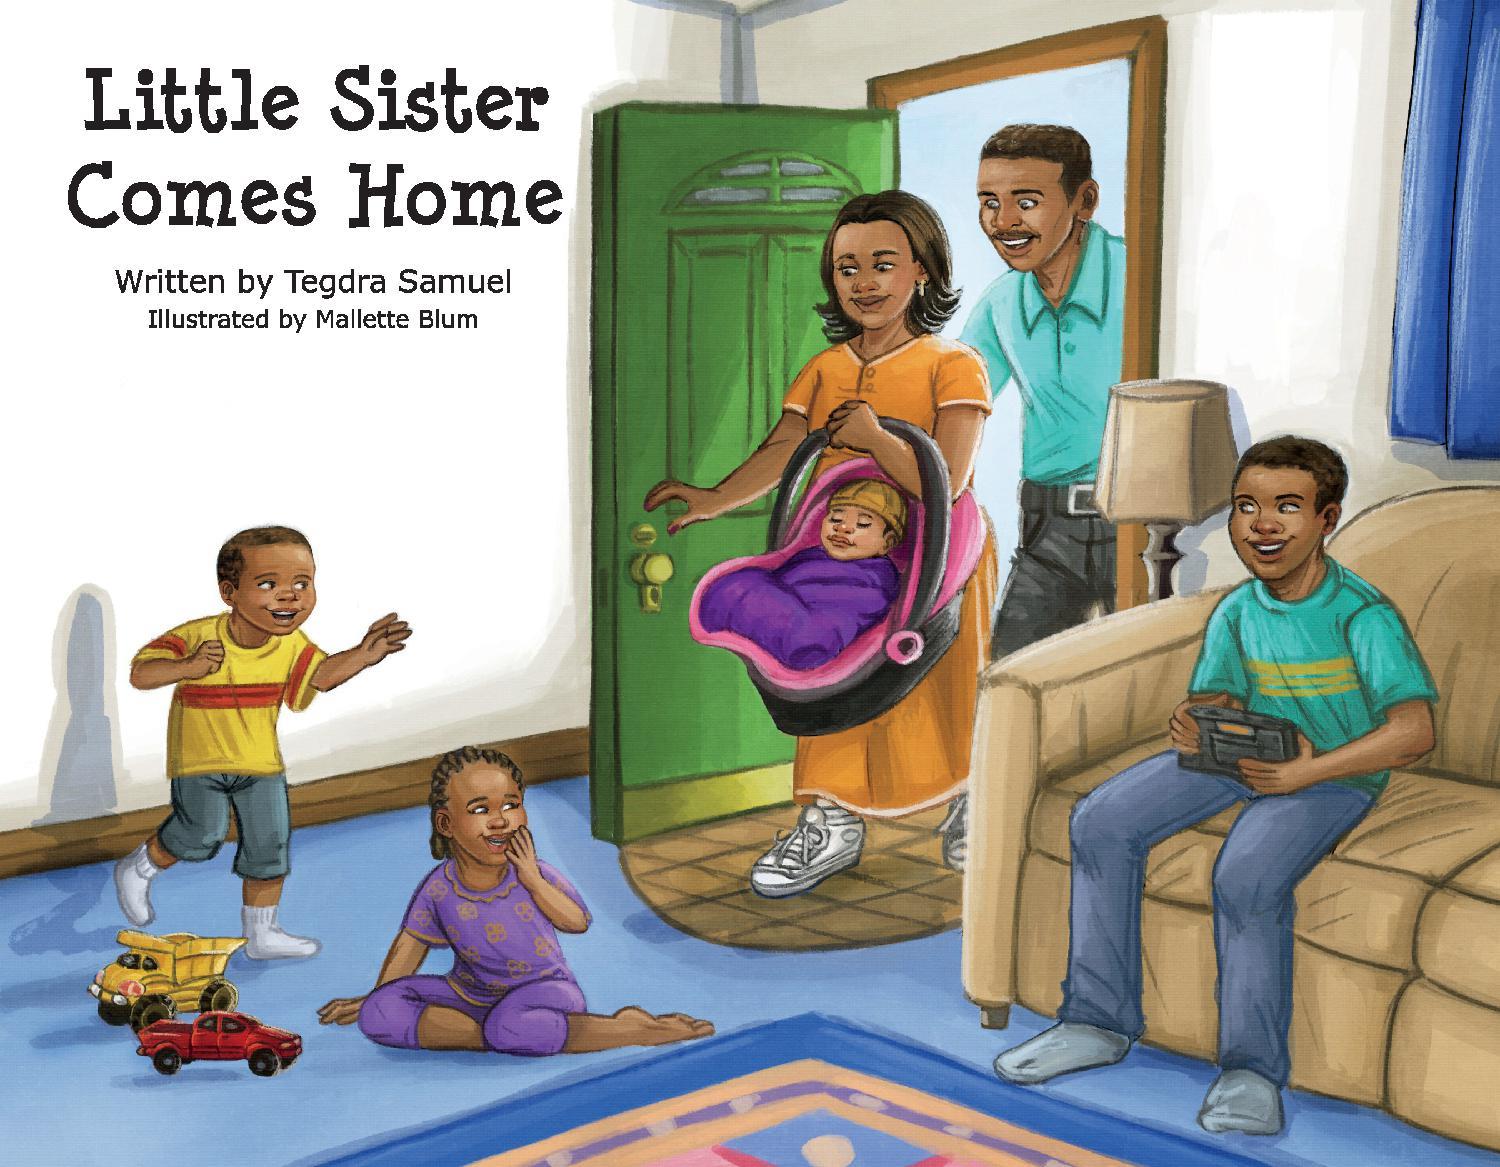 image-879405-Little_Sister_Comes_Home_Front_Cover-c51ce.jpg